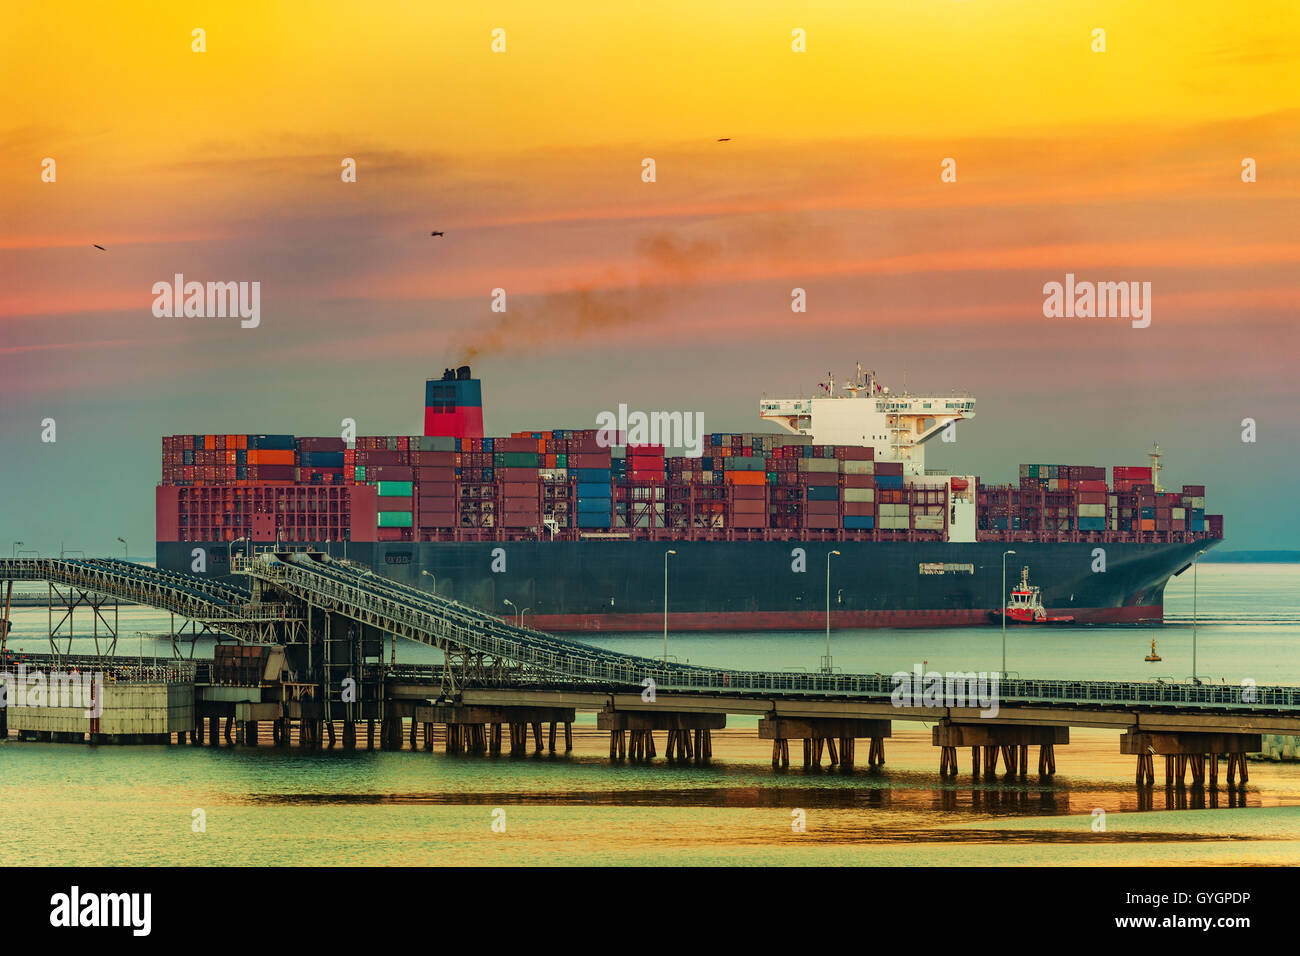 Tugboat assisting container ship on sea in the morning. Stock Photo